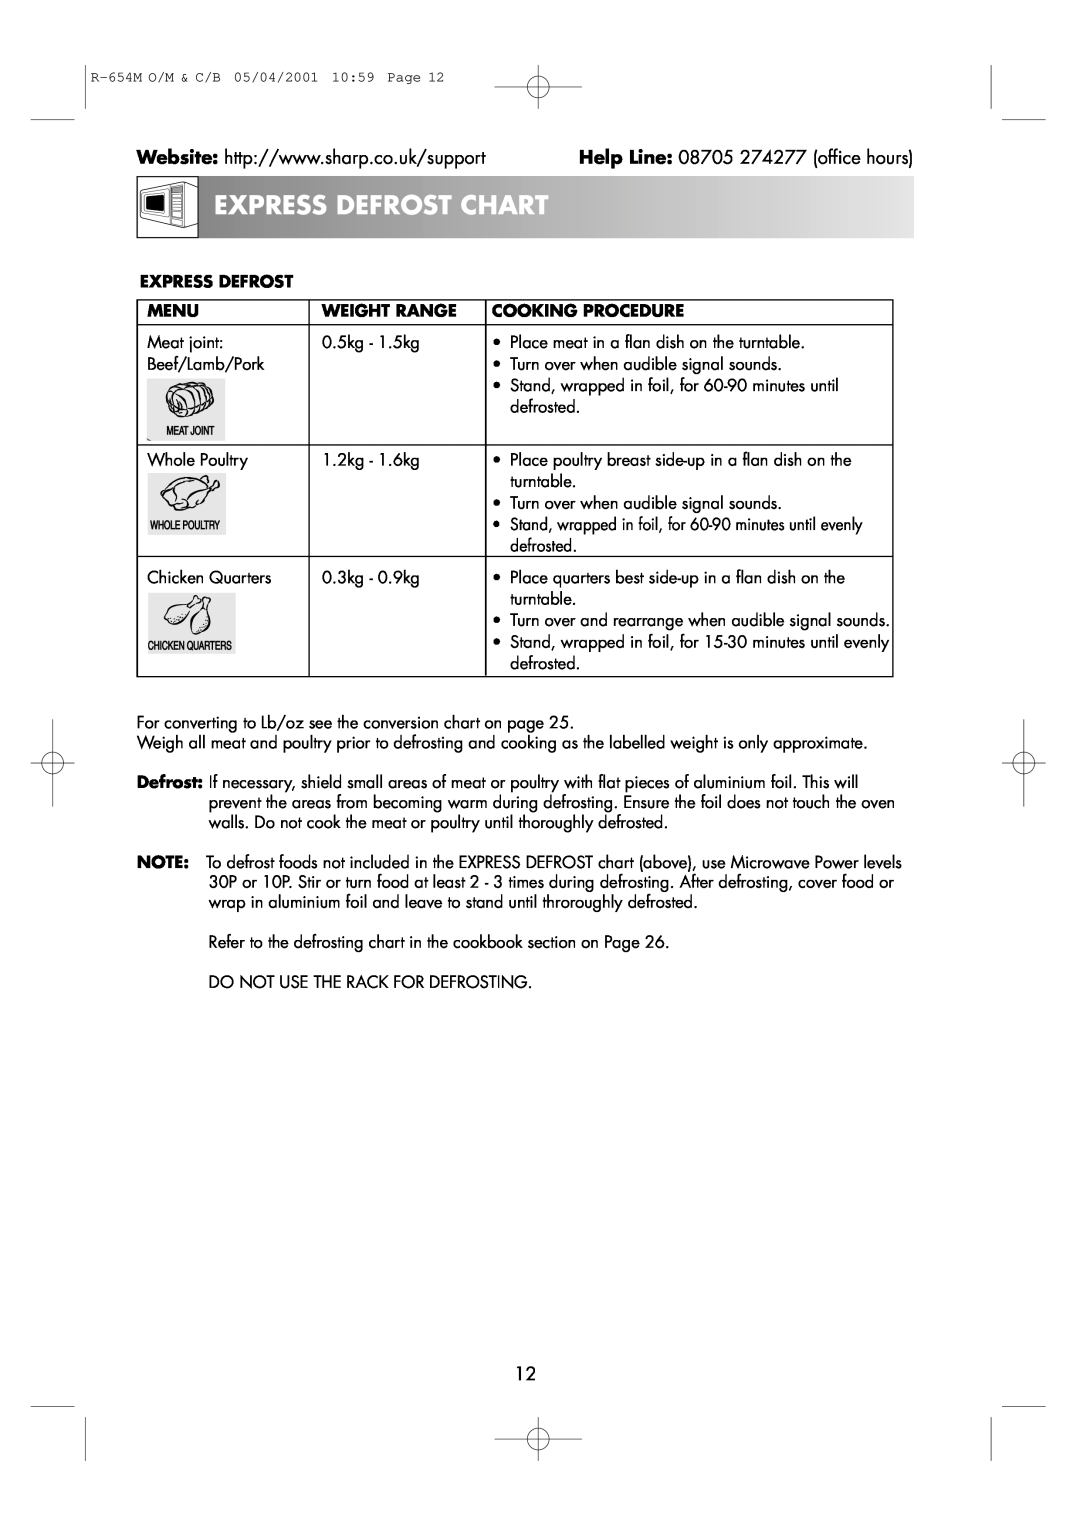 Sharp operation manual Expressdefrost Chart, Help Line 08705 274277 office hours, R-654M O/M & C/B 05/04/2001 1059 Page 